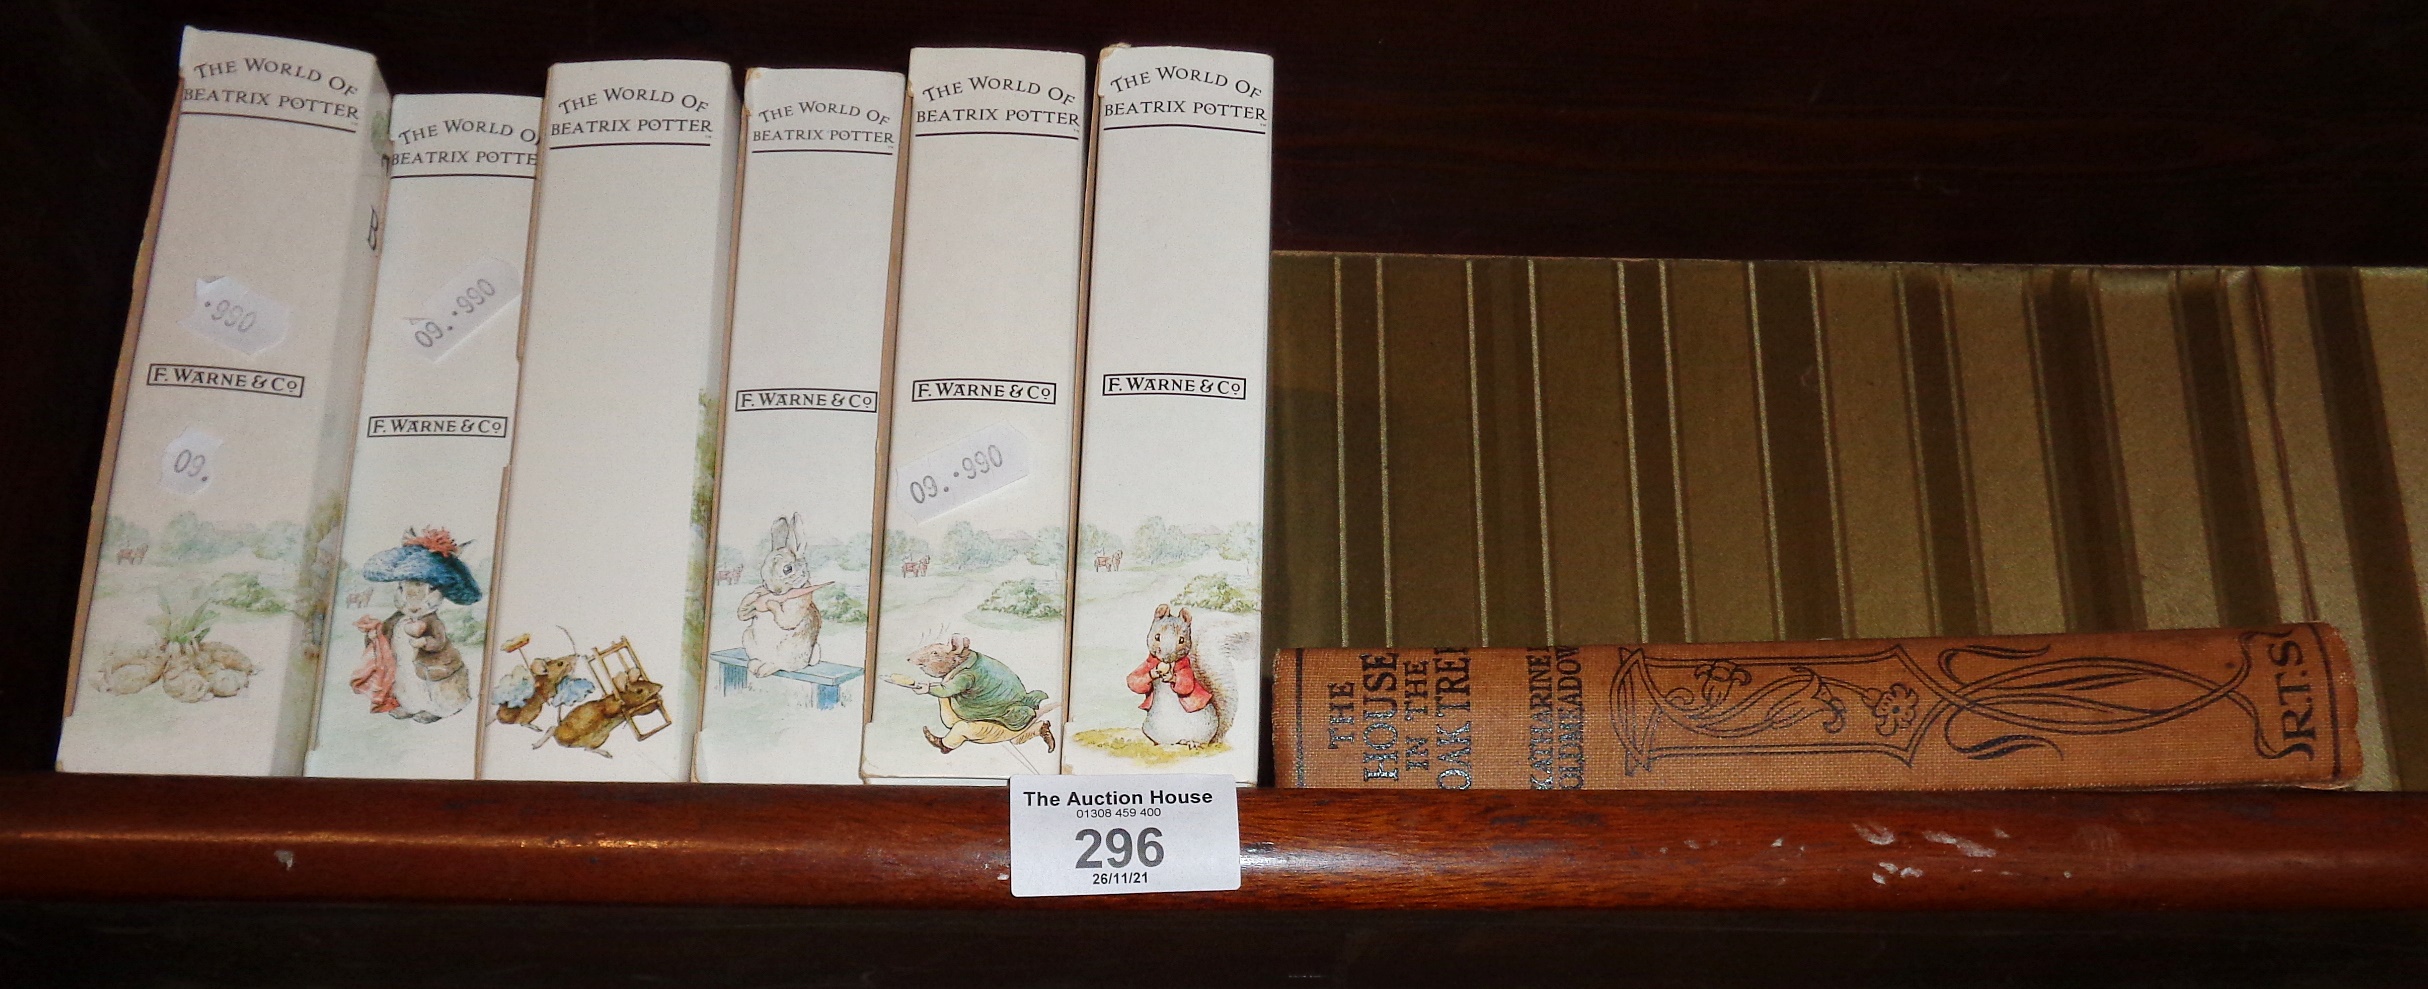 6 box set of "The World of Beatrix Potter" and another book